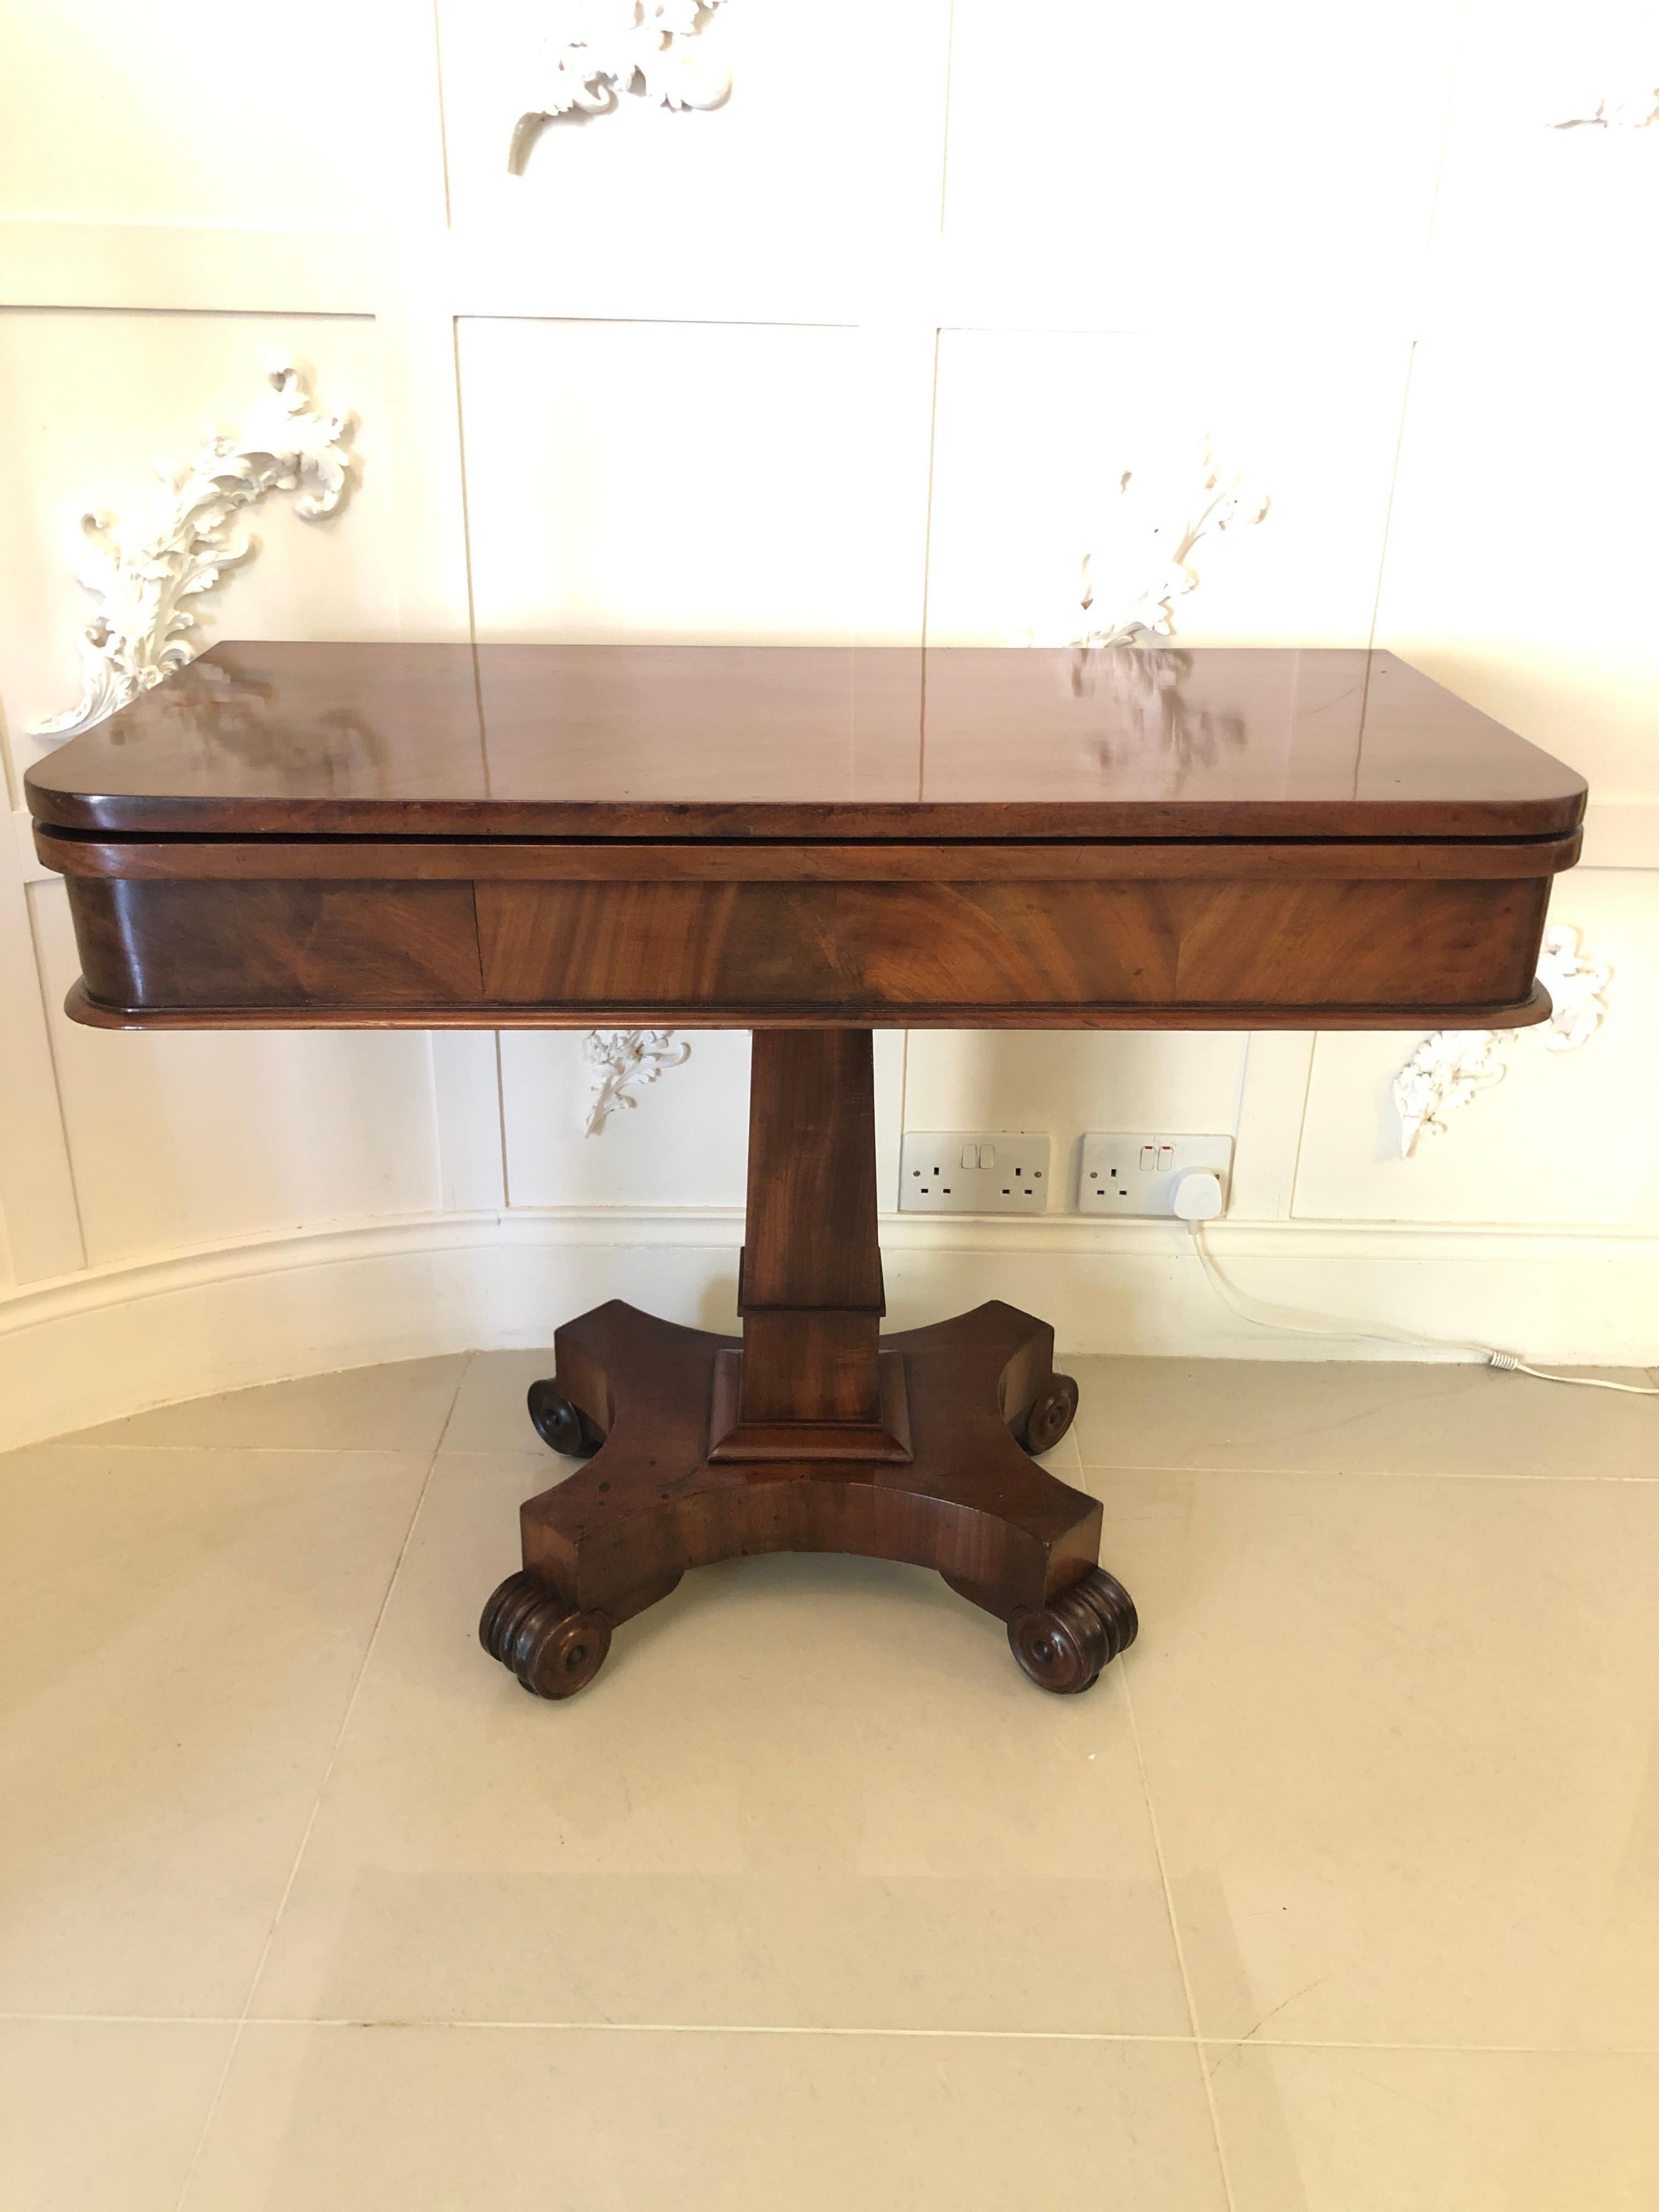 Quality antique William IV mahogany tea/side table having a marvelous mahogany round cornered swivel top opening to reveal a quality figured mahogany inside with a round cornered shaped frieze. It is raised on a square mahogany moulded pedestal and